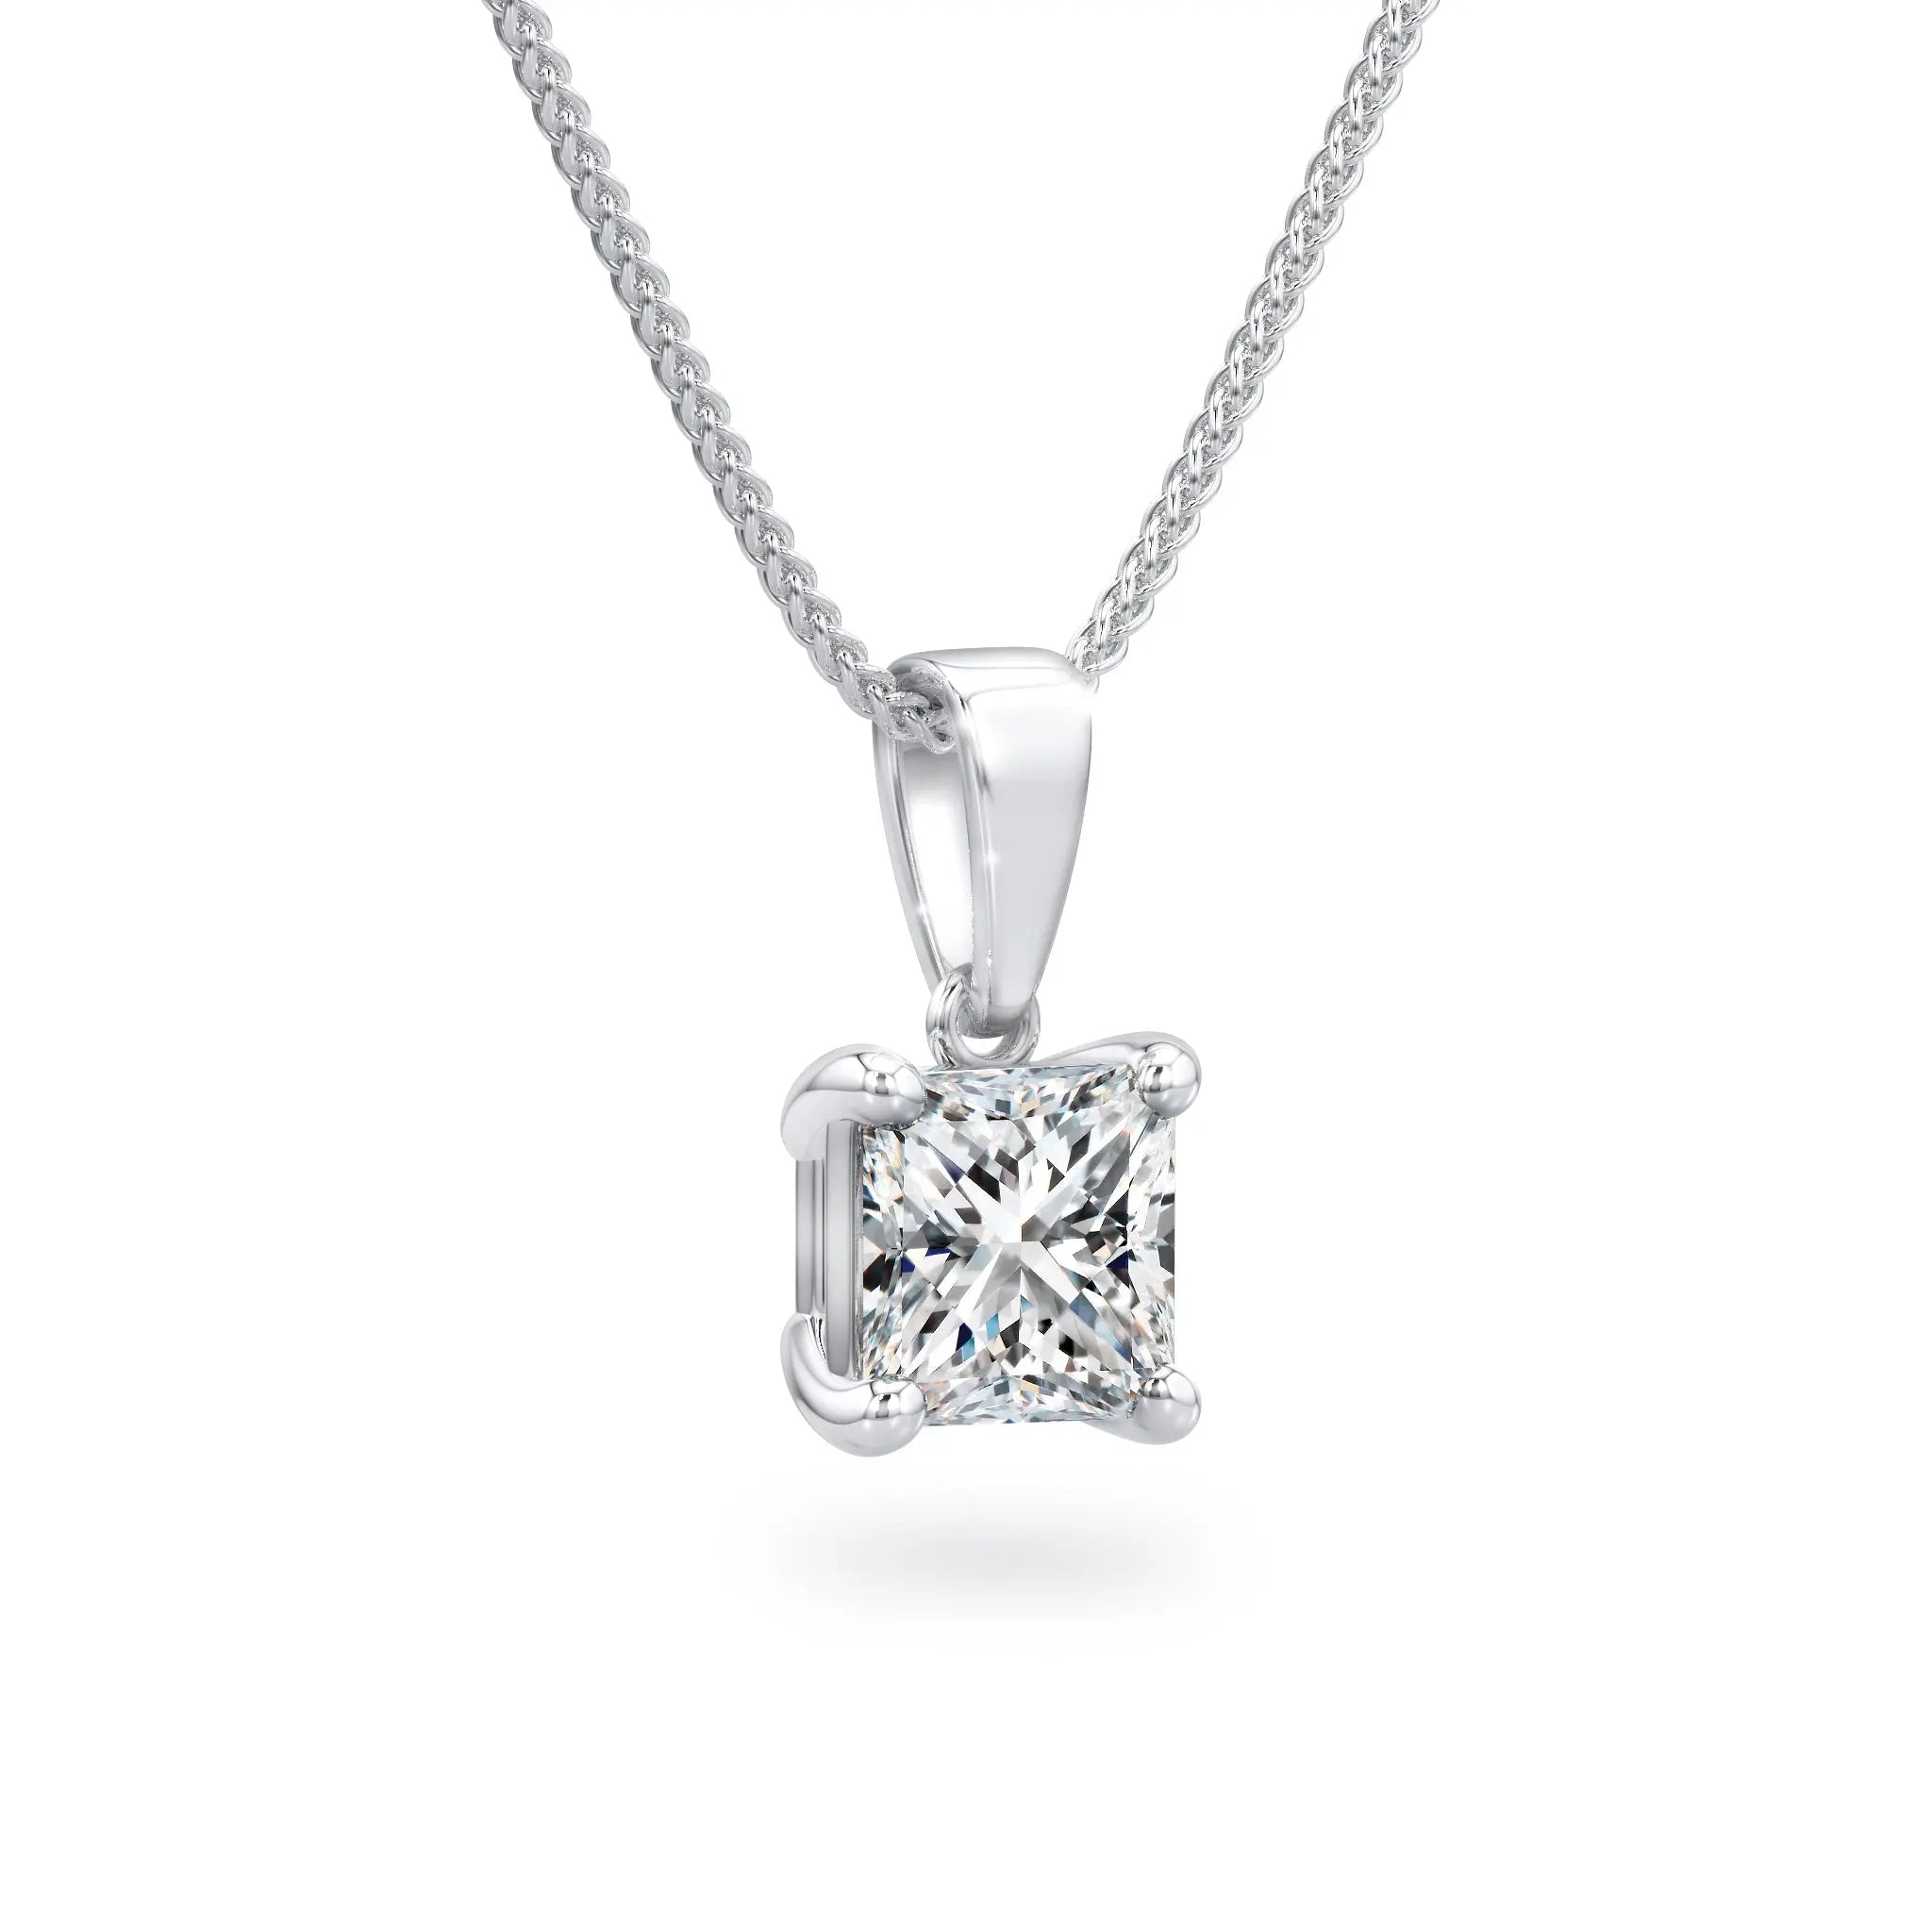 Shimansky - My Girl Solitaire Diamond Pendant 1.00ct Crafted in 18K White Gold